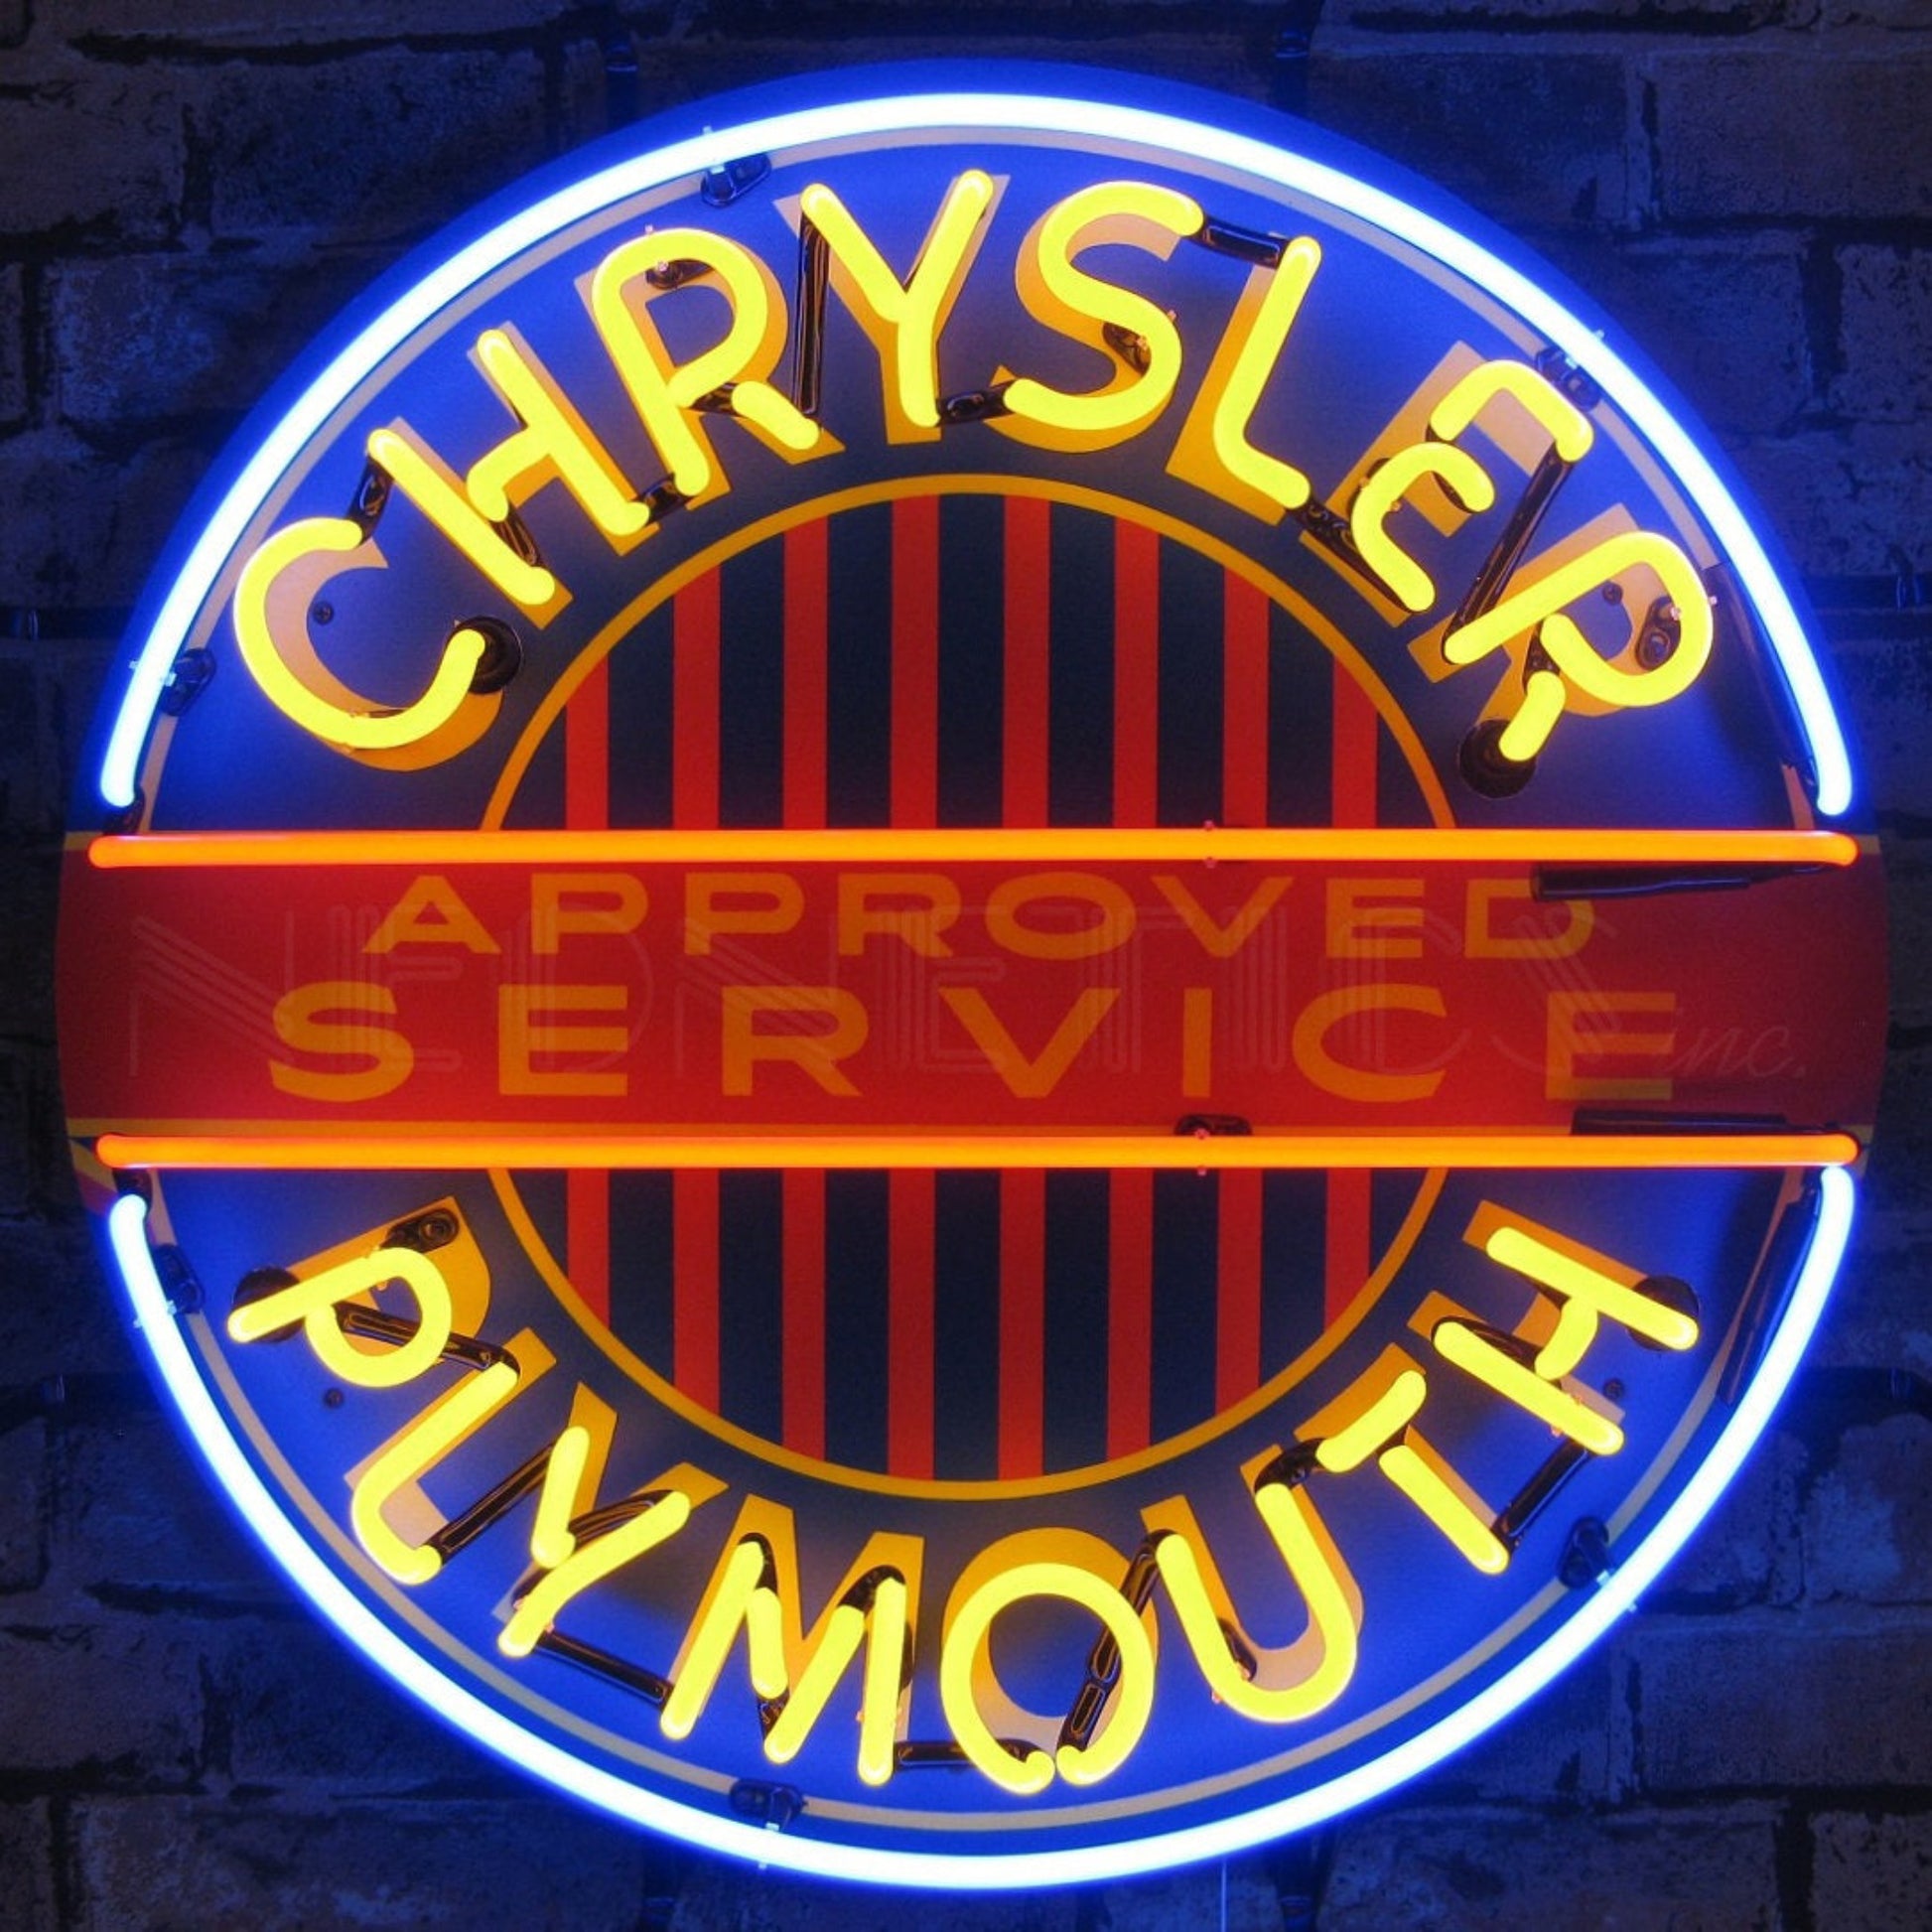 "Chrysler Plymouth Approved Service" vibrant neon sign.